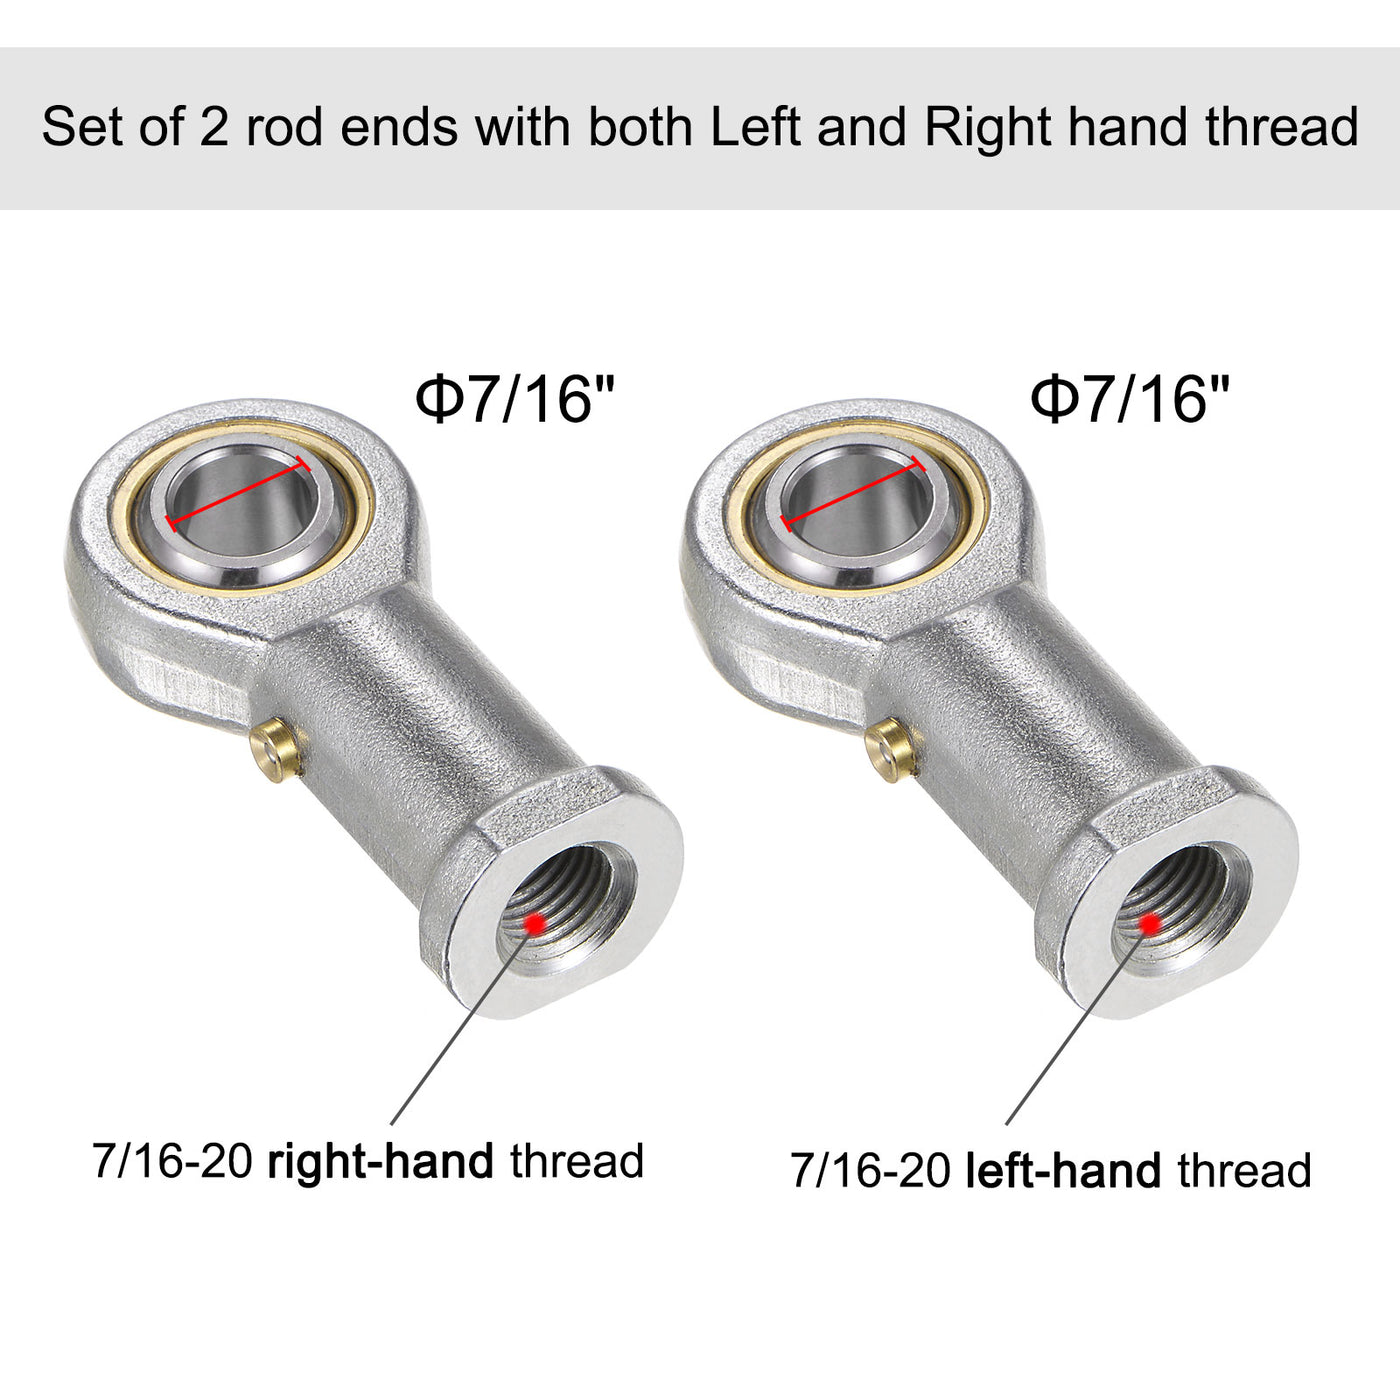 uxcell Uxcell PHSB7 7/16 Female Rod End Set - 2pcs of 7/16-20 Left & Right Thread with Jam Nut